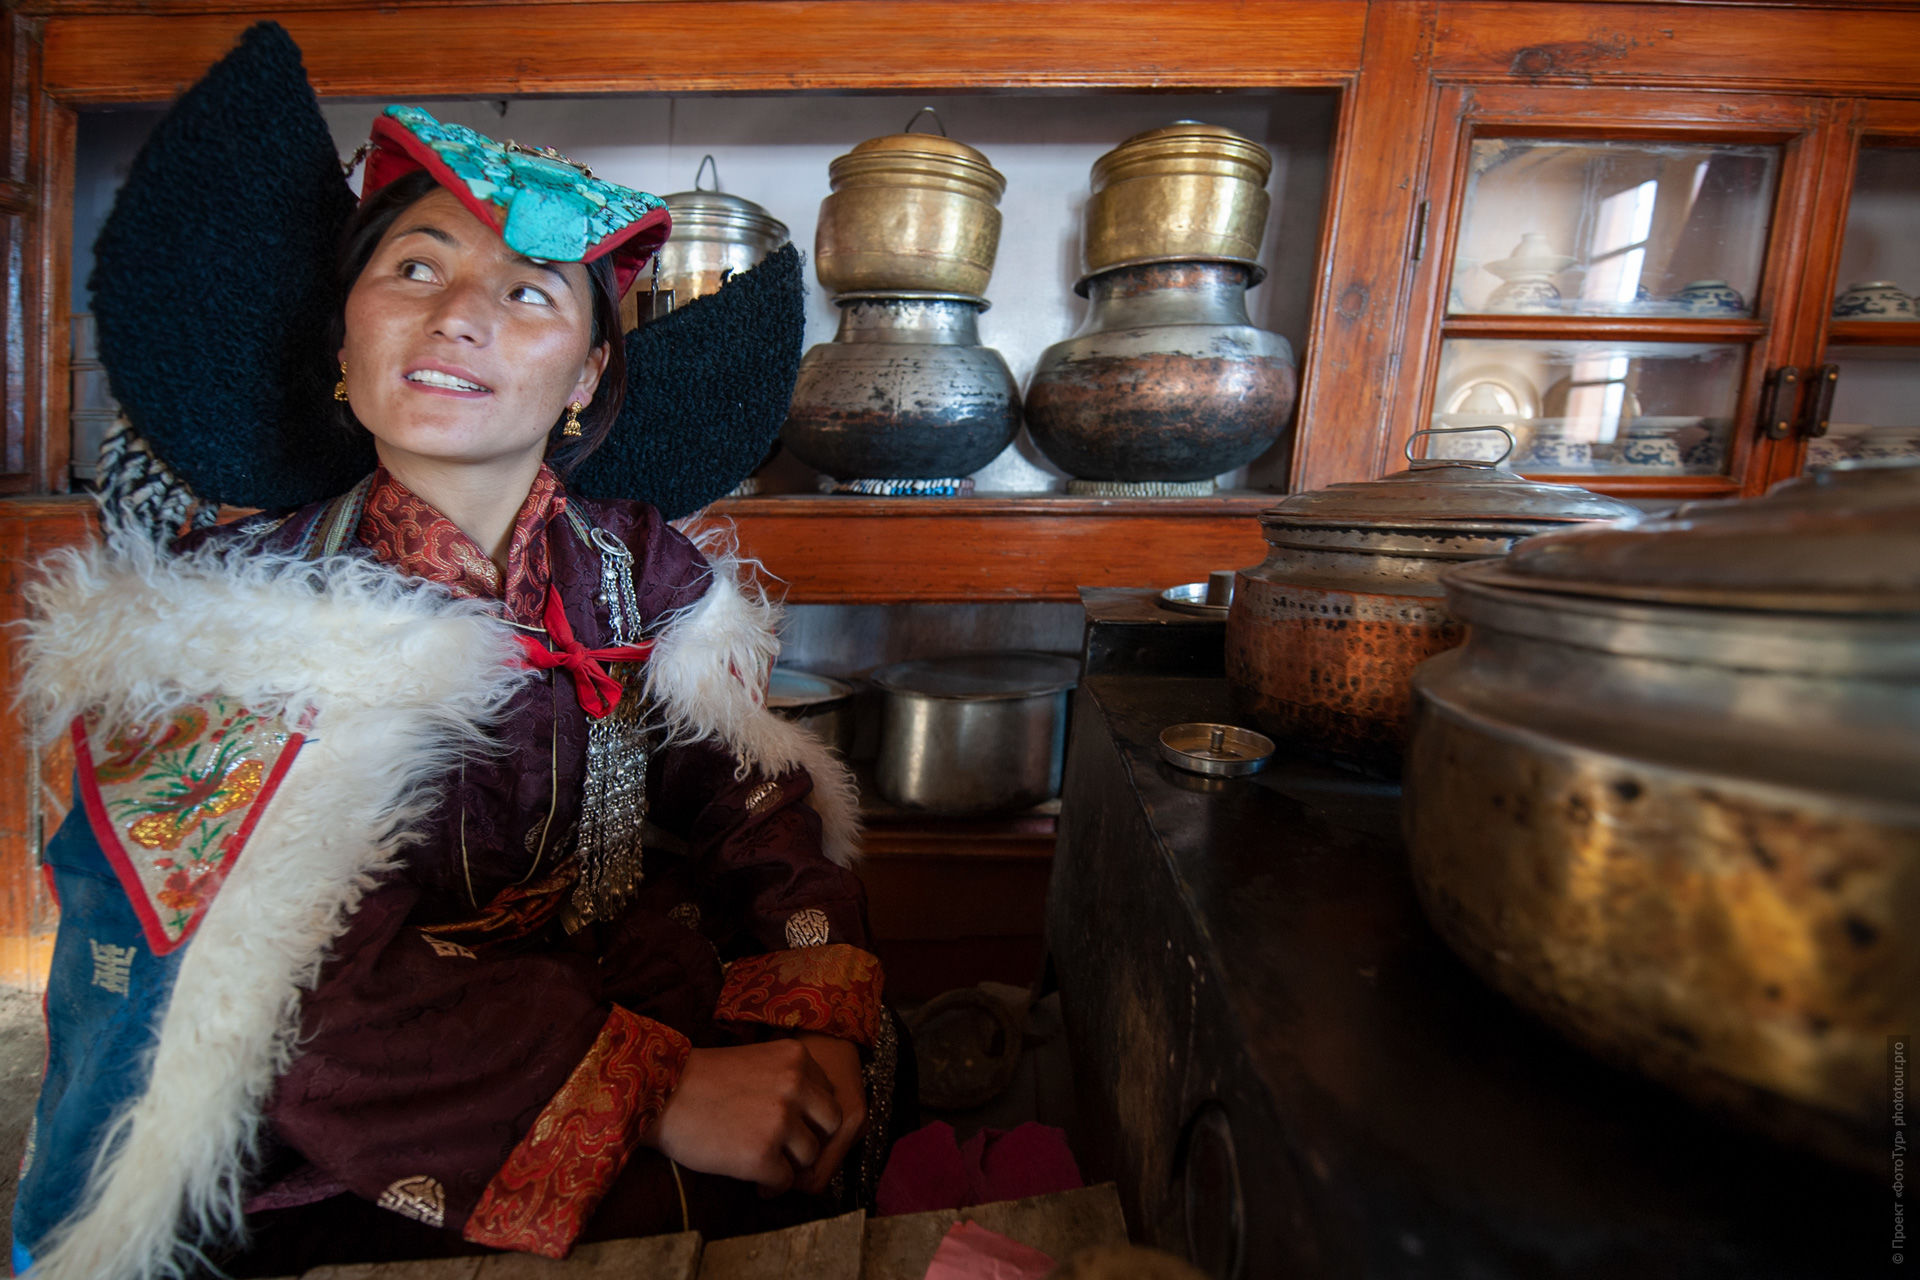 Breakfast in a traditional Ladakh house. Photo tour to Tibet for the Winter Mysteries in Ladakh, Stok and Matho monasteries, 01.03. - 03/10/2020